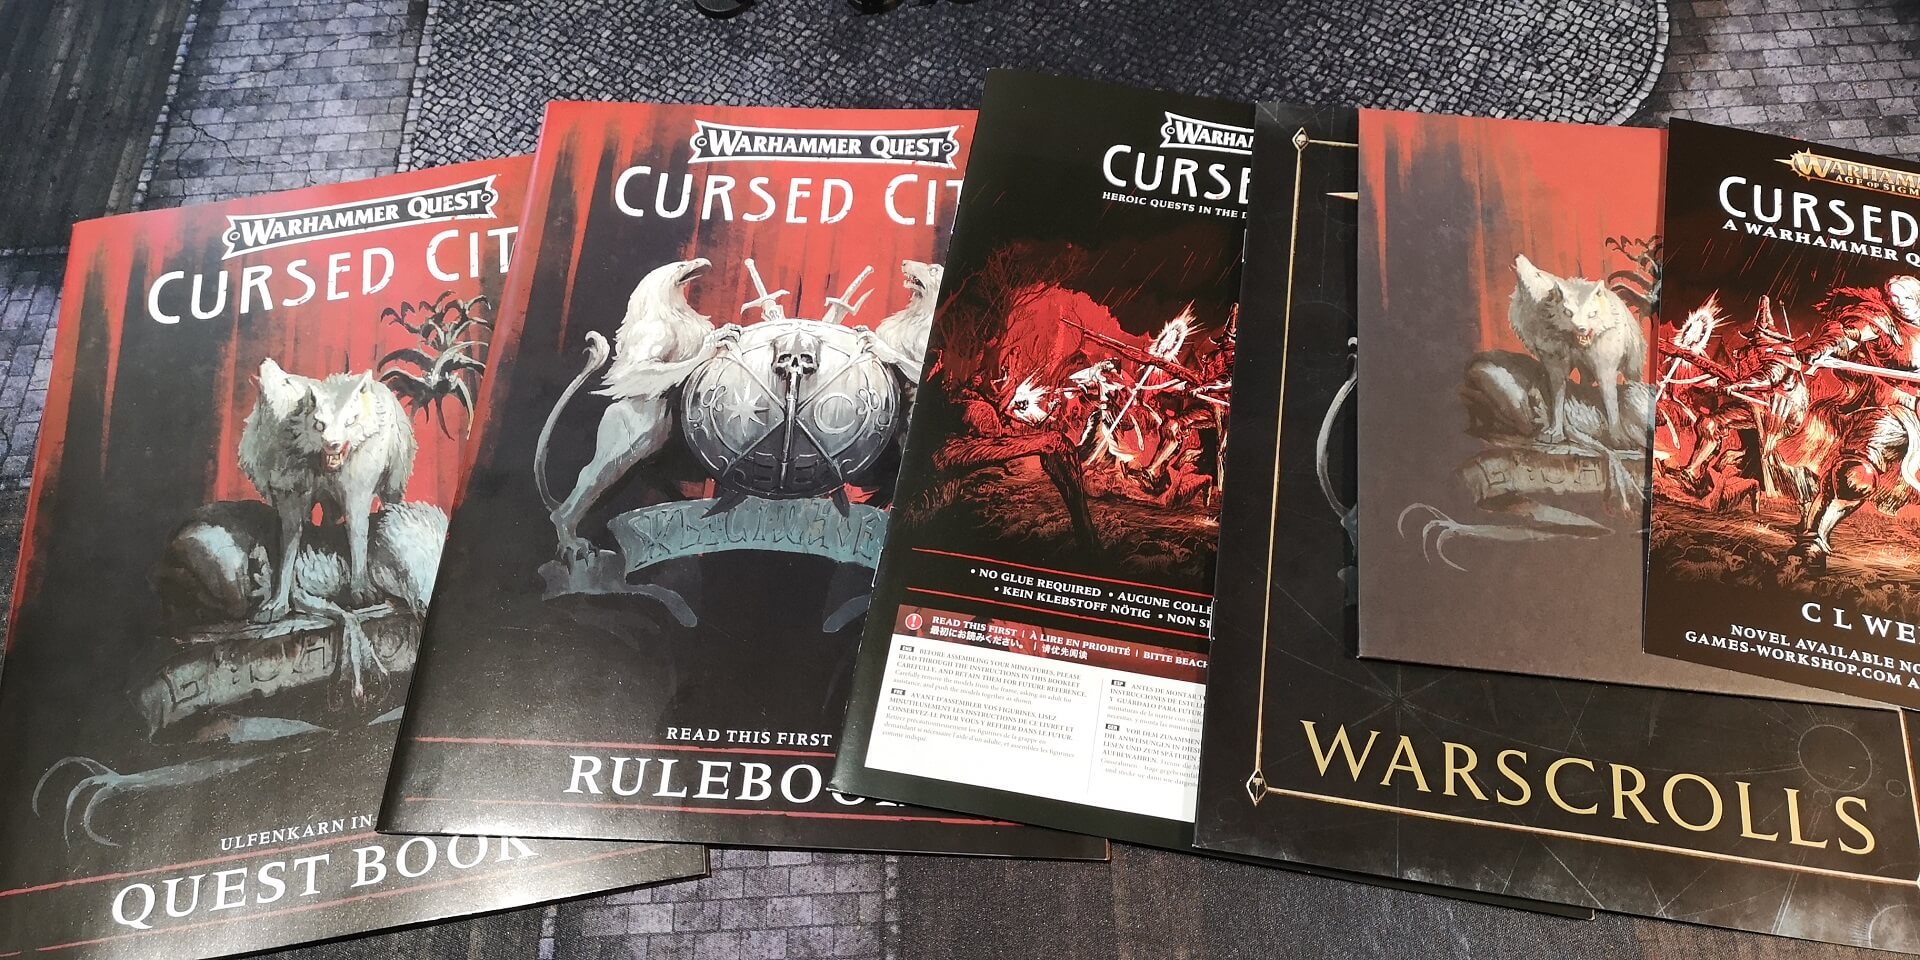 Warhammer Quest Cursed City Books.